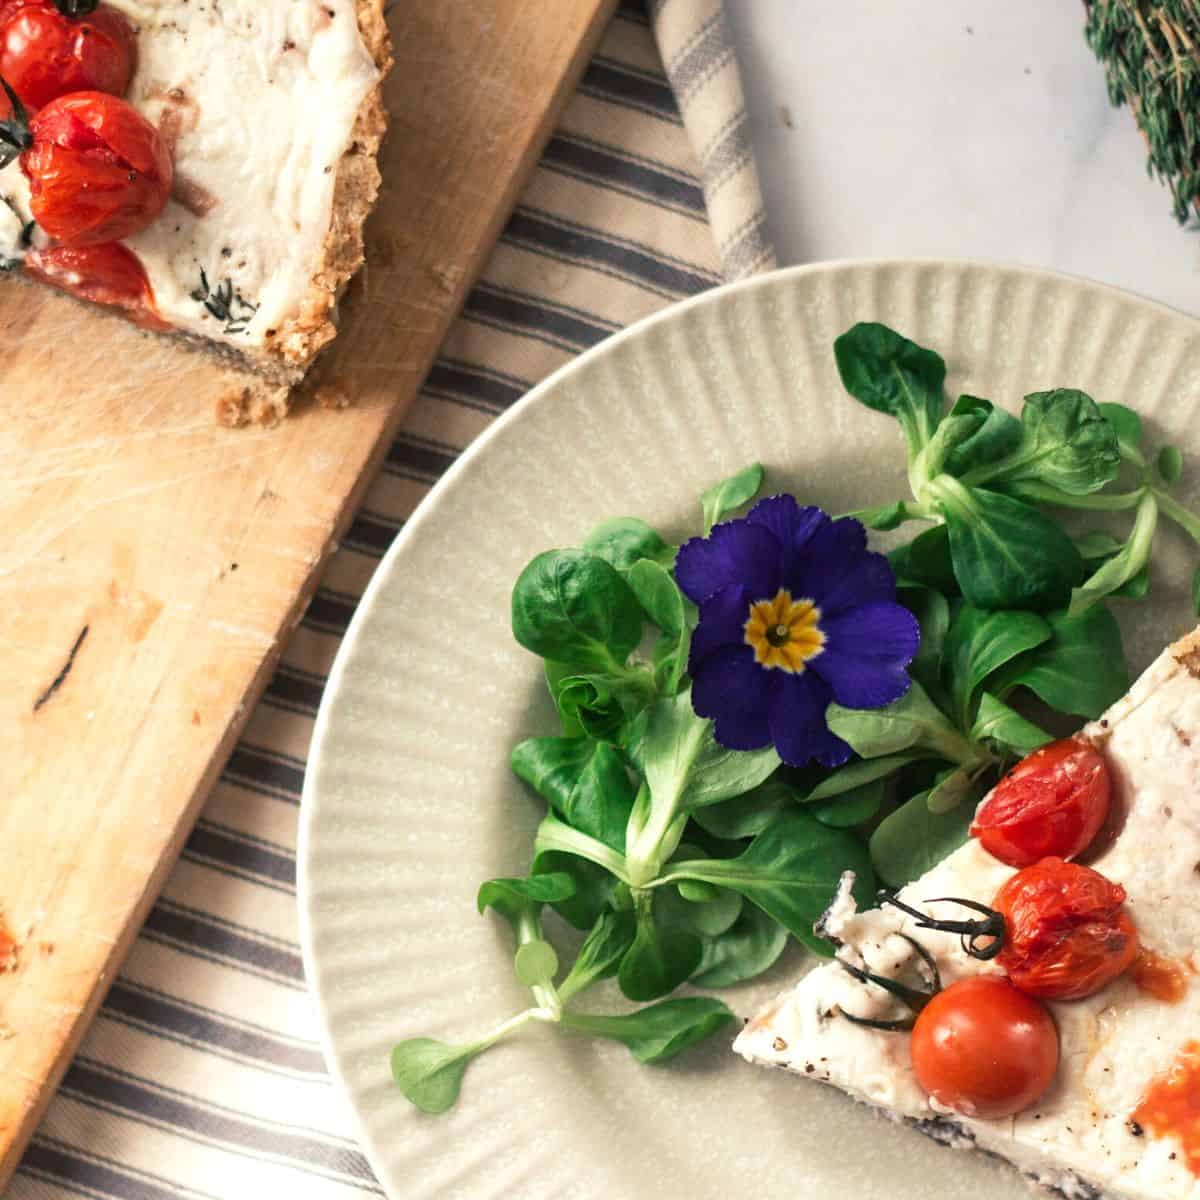 Vegan Tomato, Cream Cheese and Onion Marmalade Tart – Perfect for Father’s Day